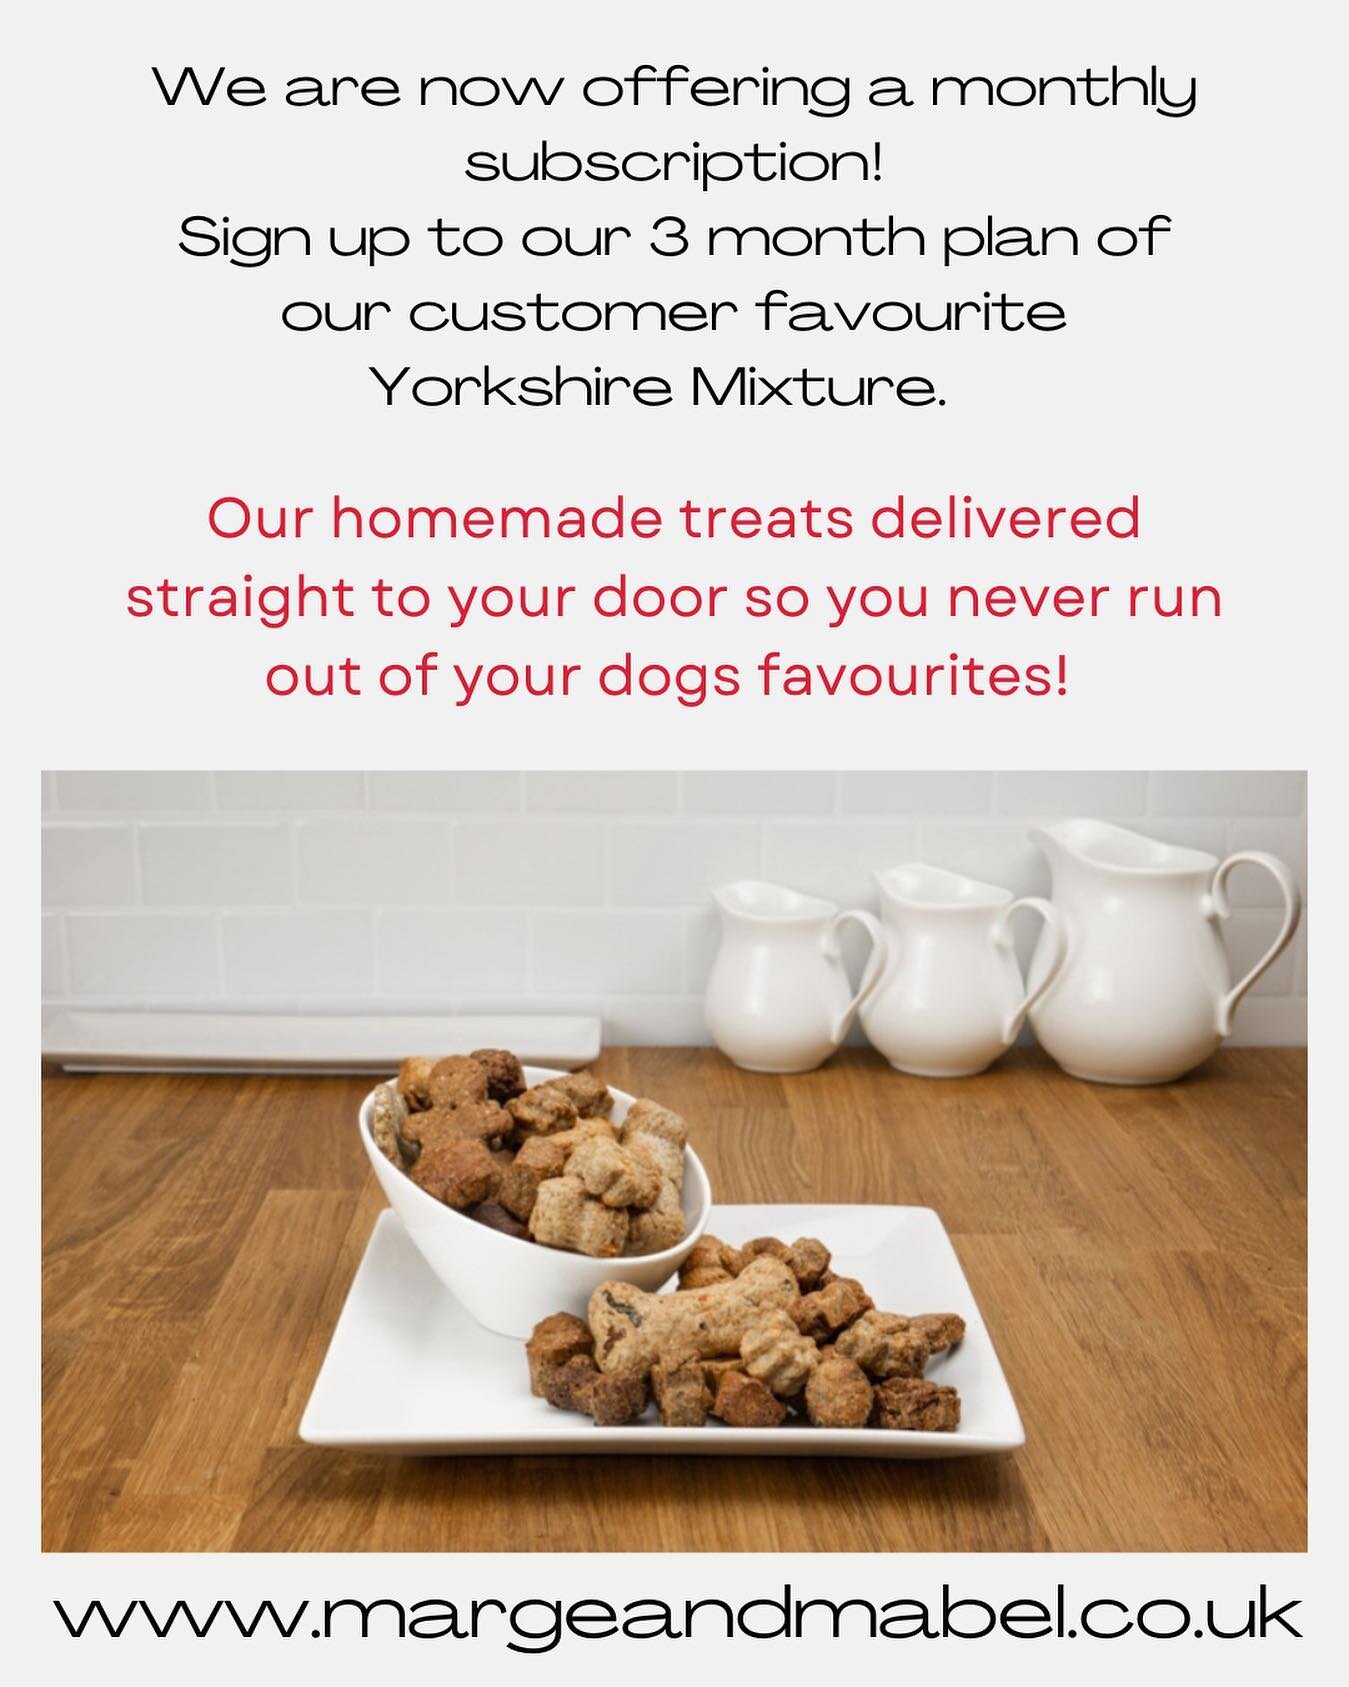 Sign up to our 3 month subscription plan to receive our customer favourite &lsquo;Yorkshire Mixture&rsquo; to get delivered direct to your door. 

Free delivery - try now with 20% off your first box use code TREATS20

Plus the first 20 people to sign